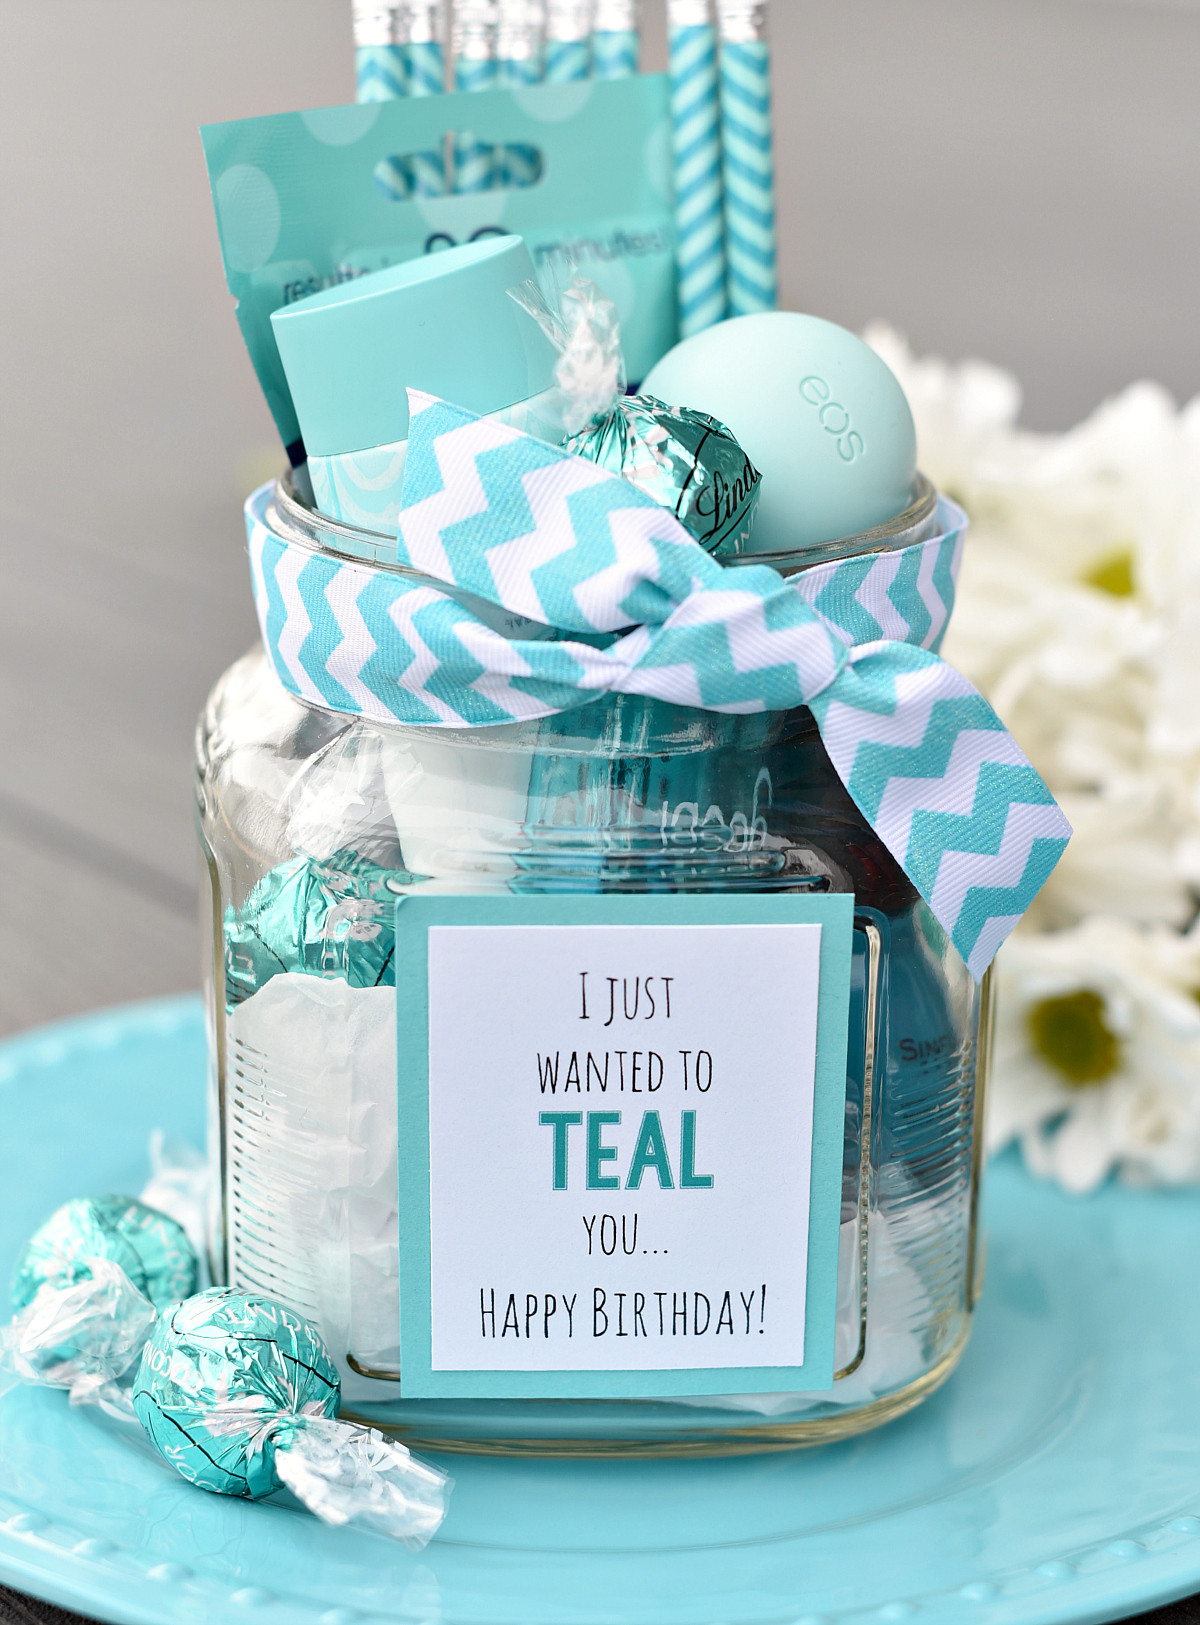 Popular Gift Baskets Ideas
 Teal Birthday Gift Idea for Friends – Fun Squared